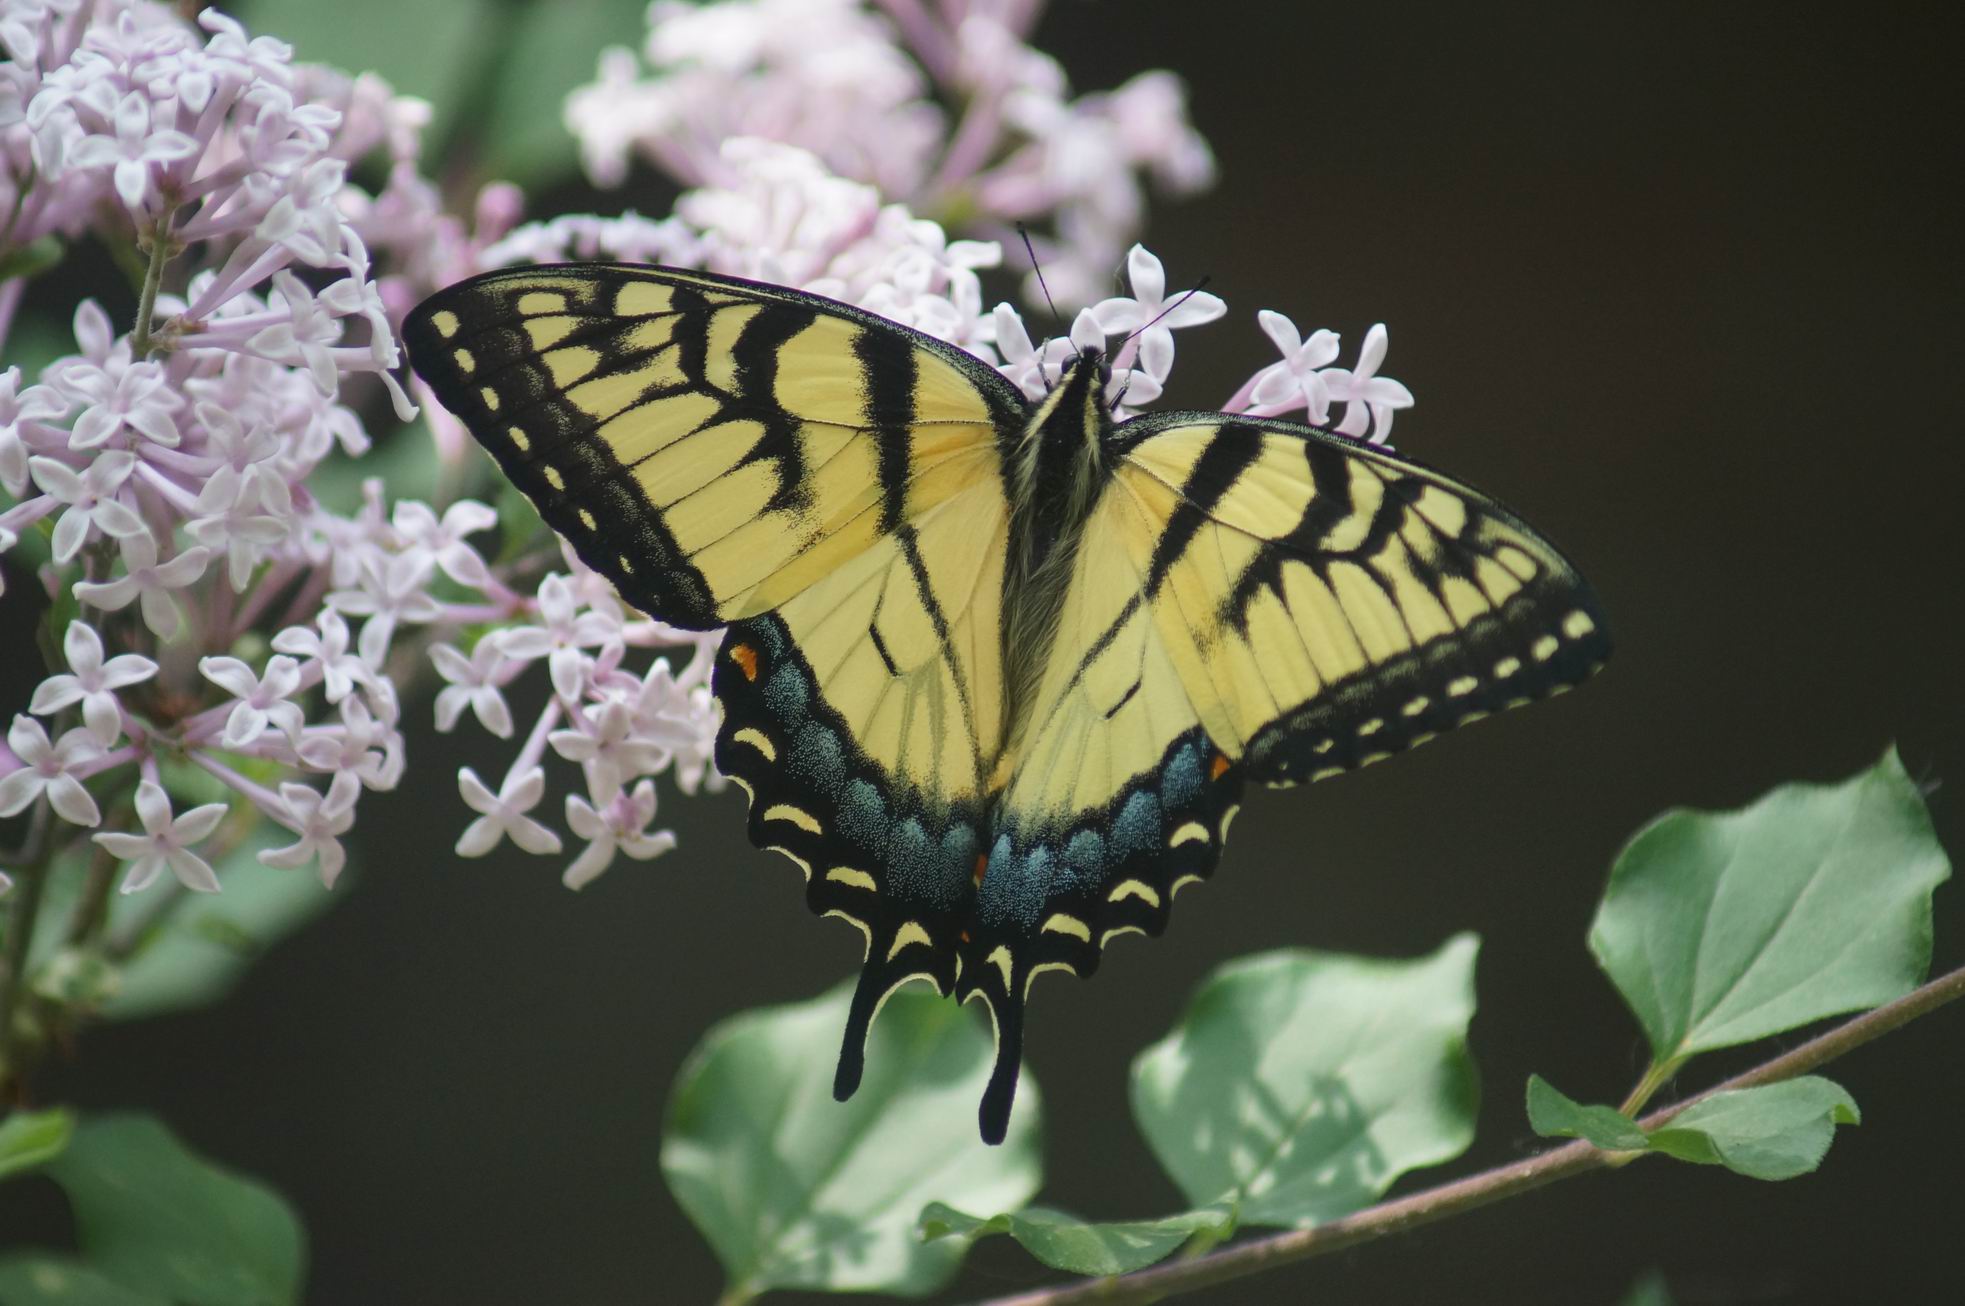 Swallowtail Butterfly. Photo by Miriam Garfinkle.